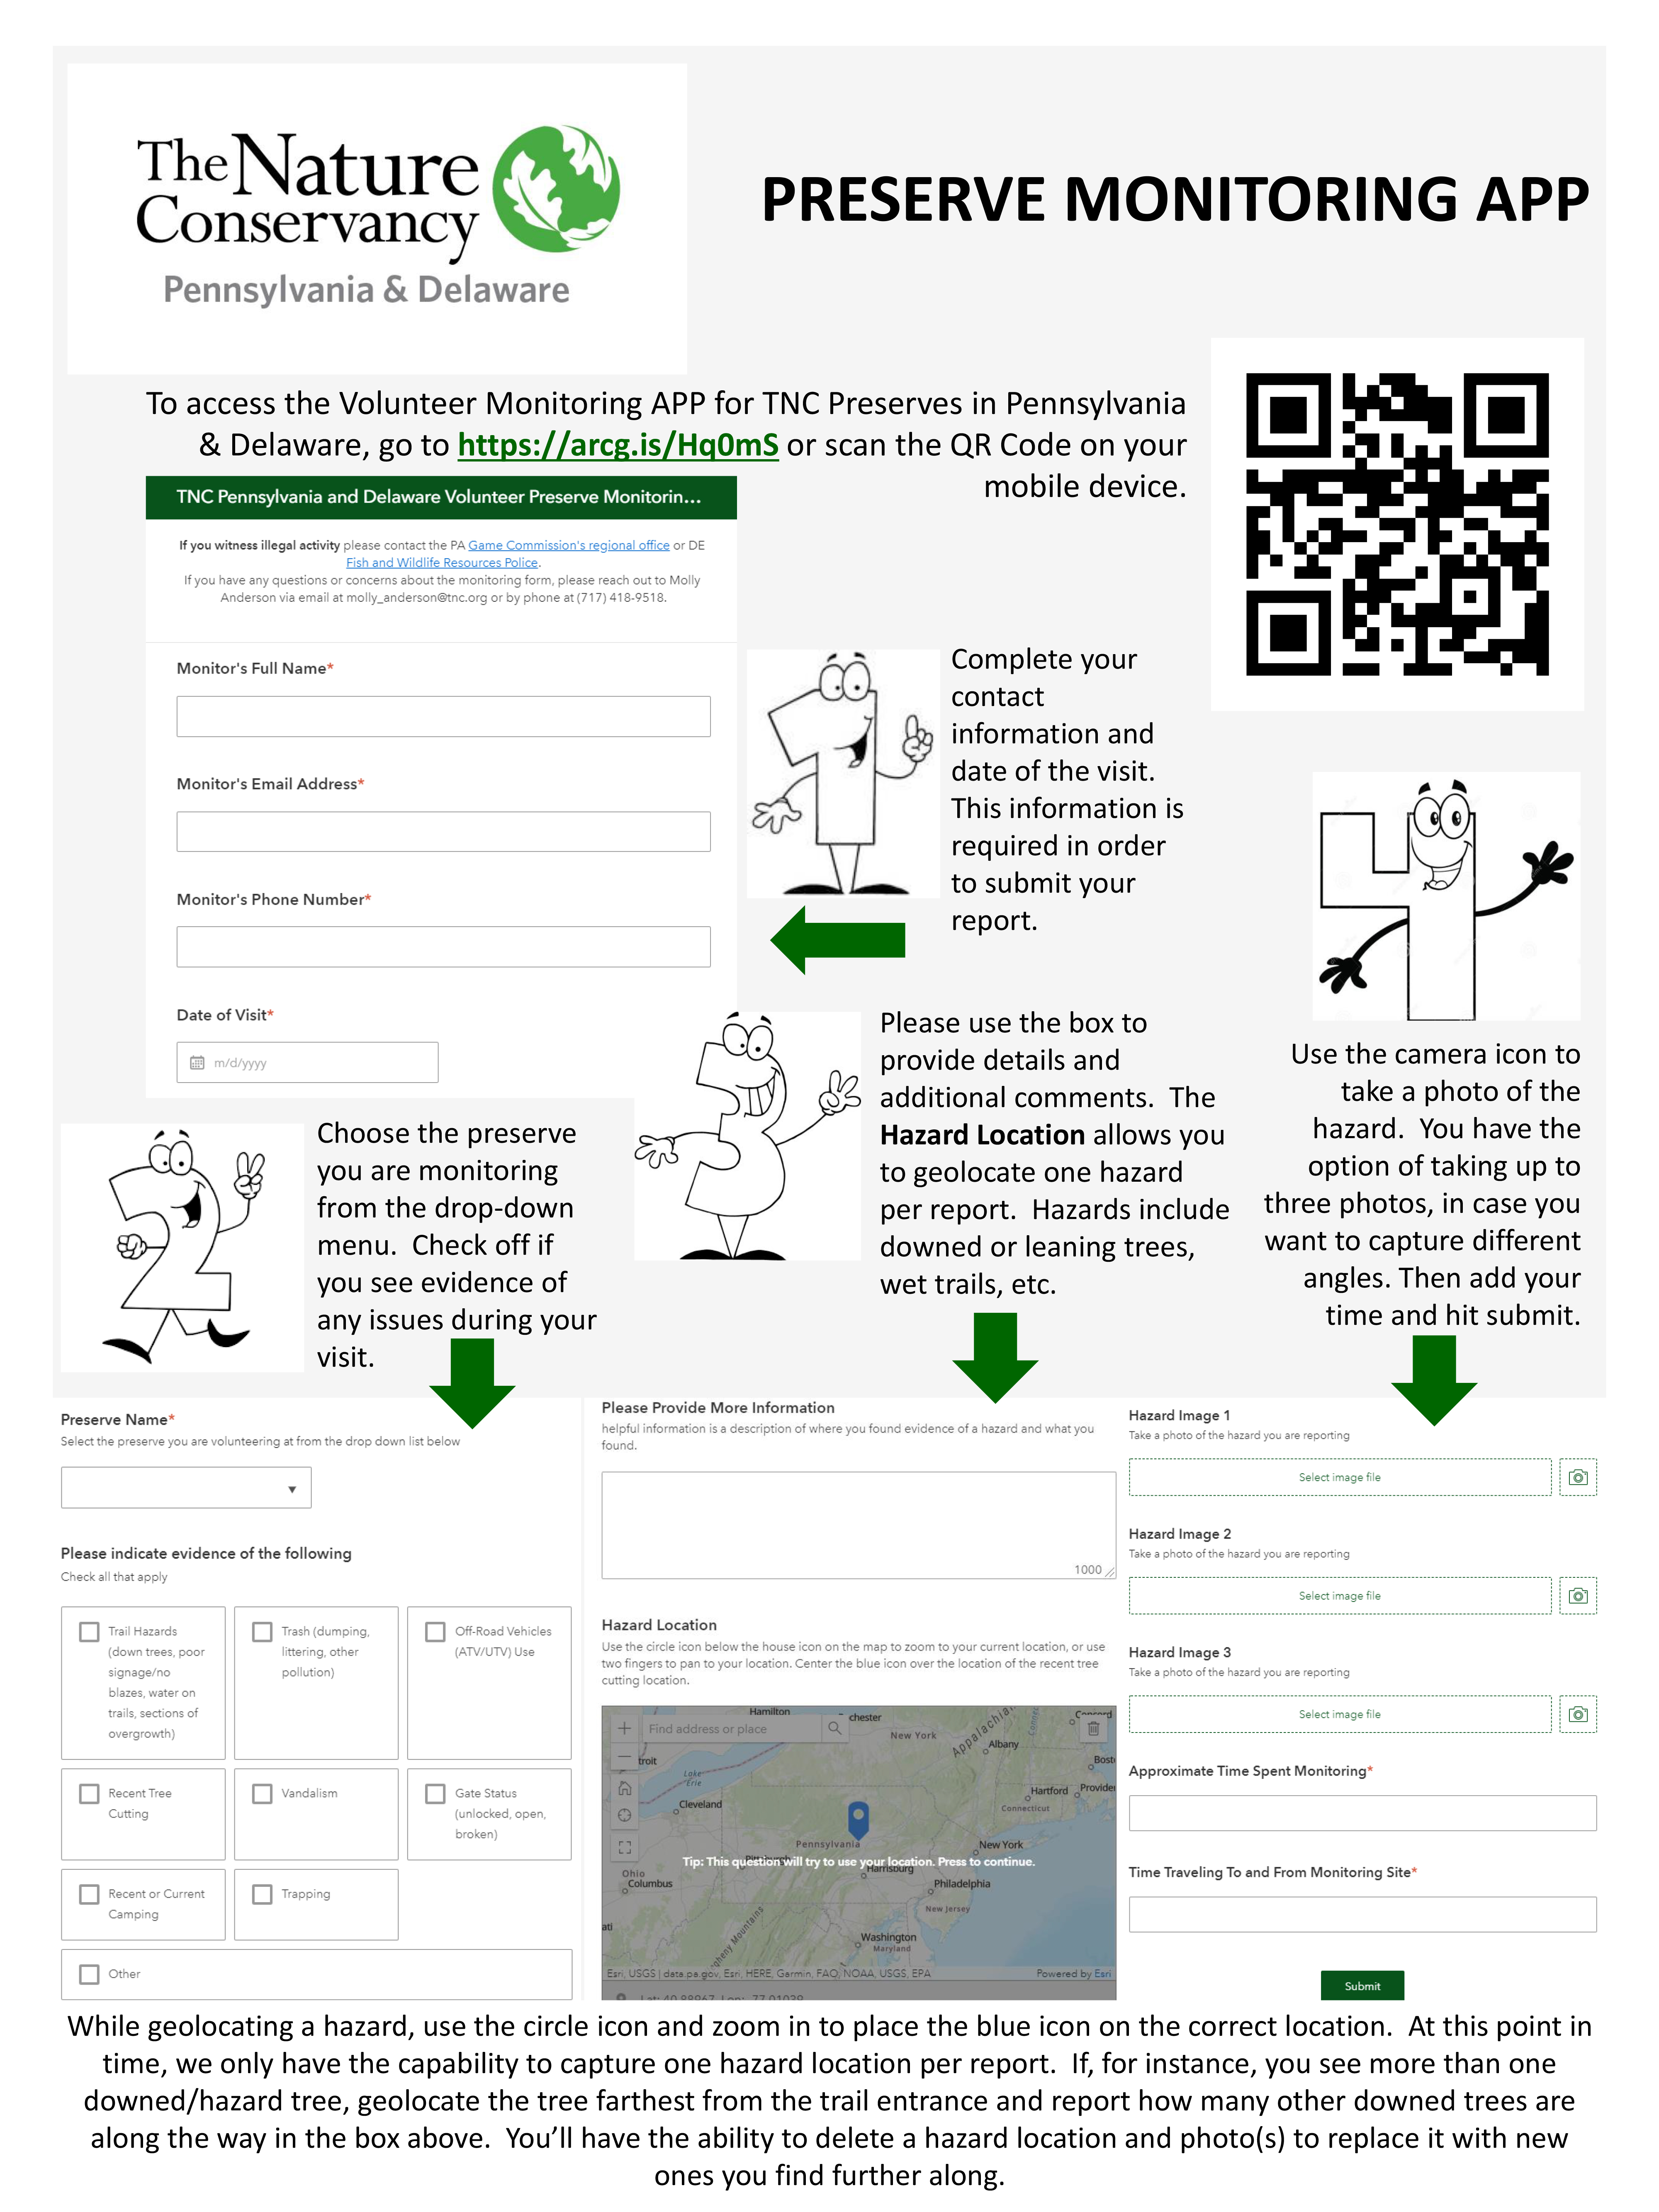 Factsheet explaining how to use the PA/DE preserve monitoring app. Instructions are shown in text and graphics. A QR code in the upper right corner allows users to download the app.